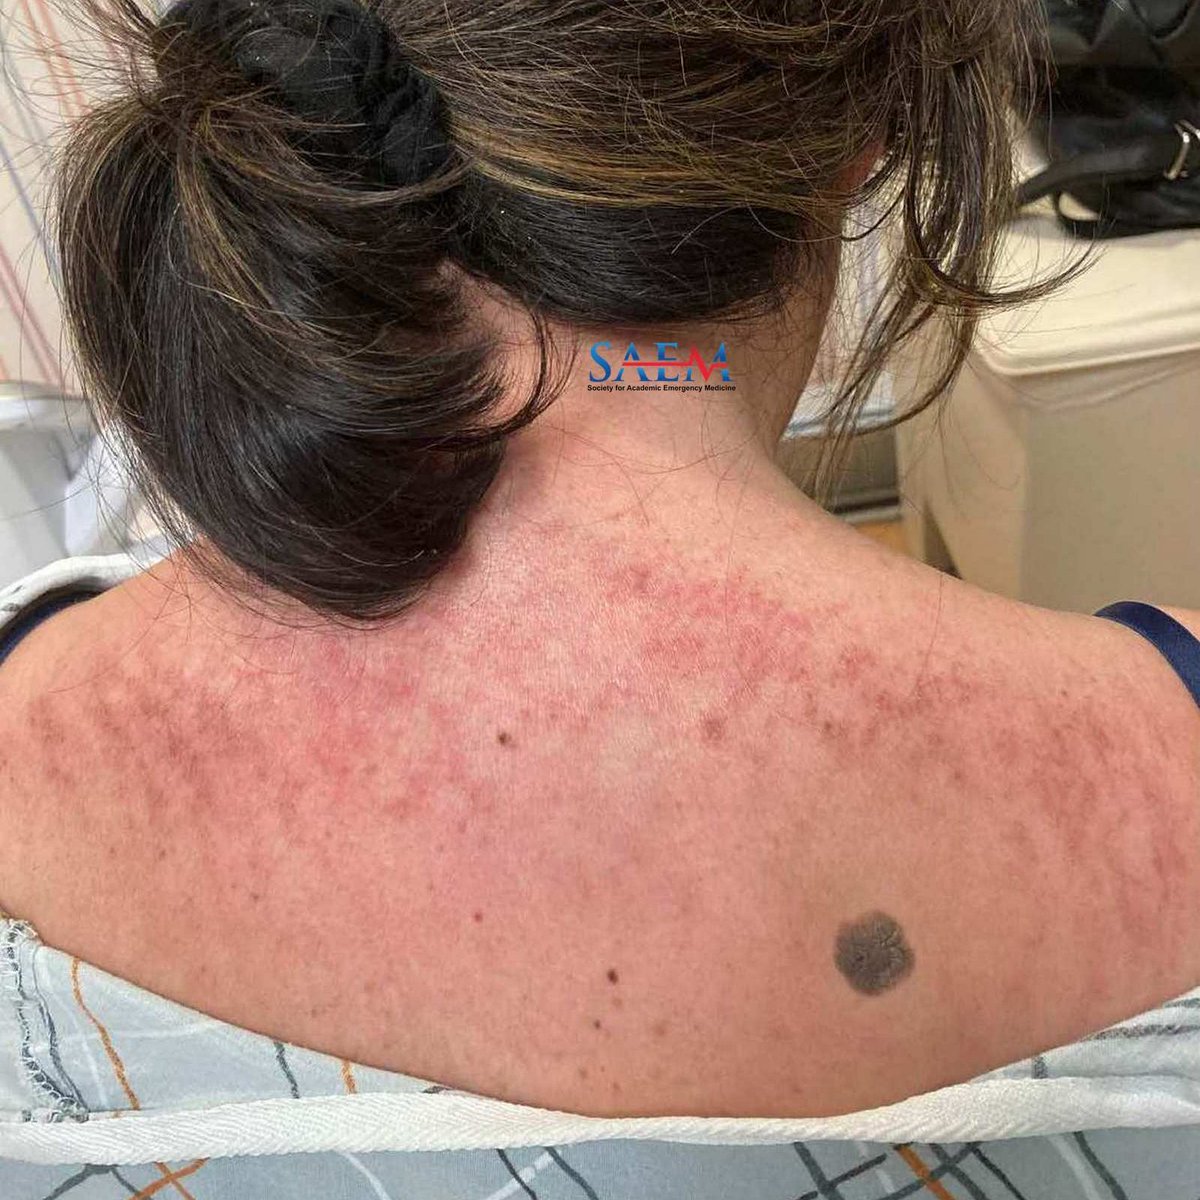 SAEM Clinical Images Series: More than Skin Deep The combination of skin rash and shortness of breath may not be as random as first glance would suggest... Check out this case from @NYPQ_EM. aliem.com/saem-clinical-… @SAEMonline